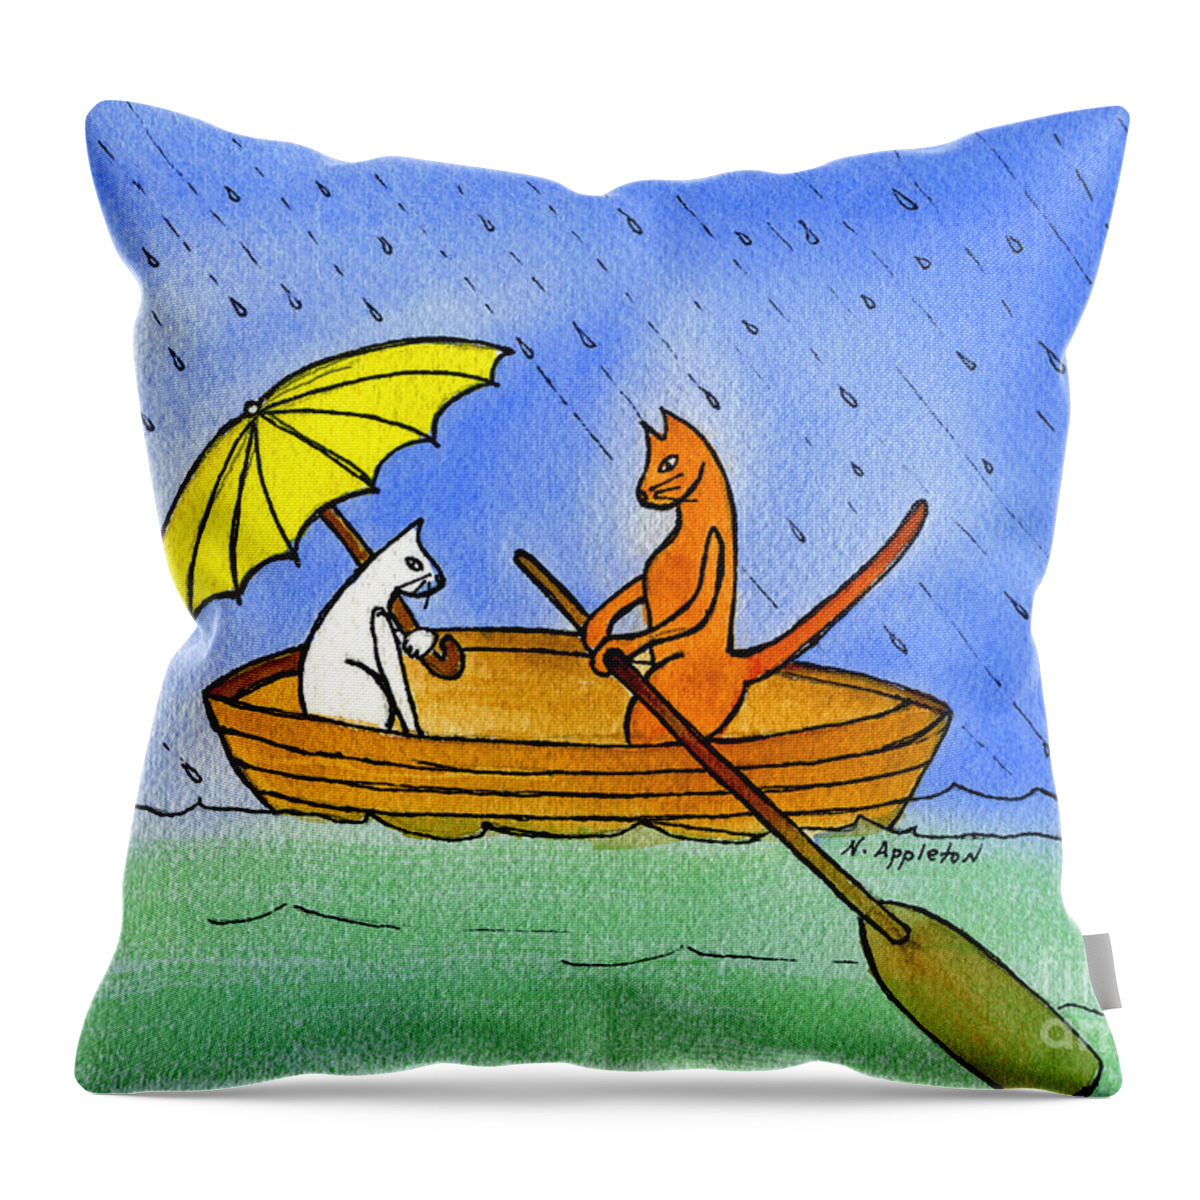 Kitties Throw Pillow featuring the painting Kitties in a Boat by Norma Appleton